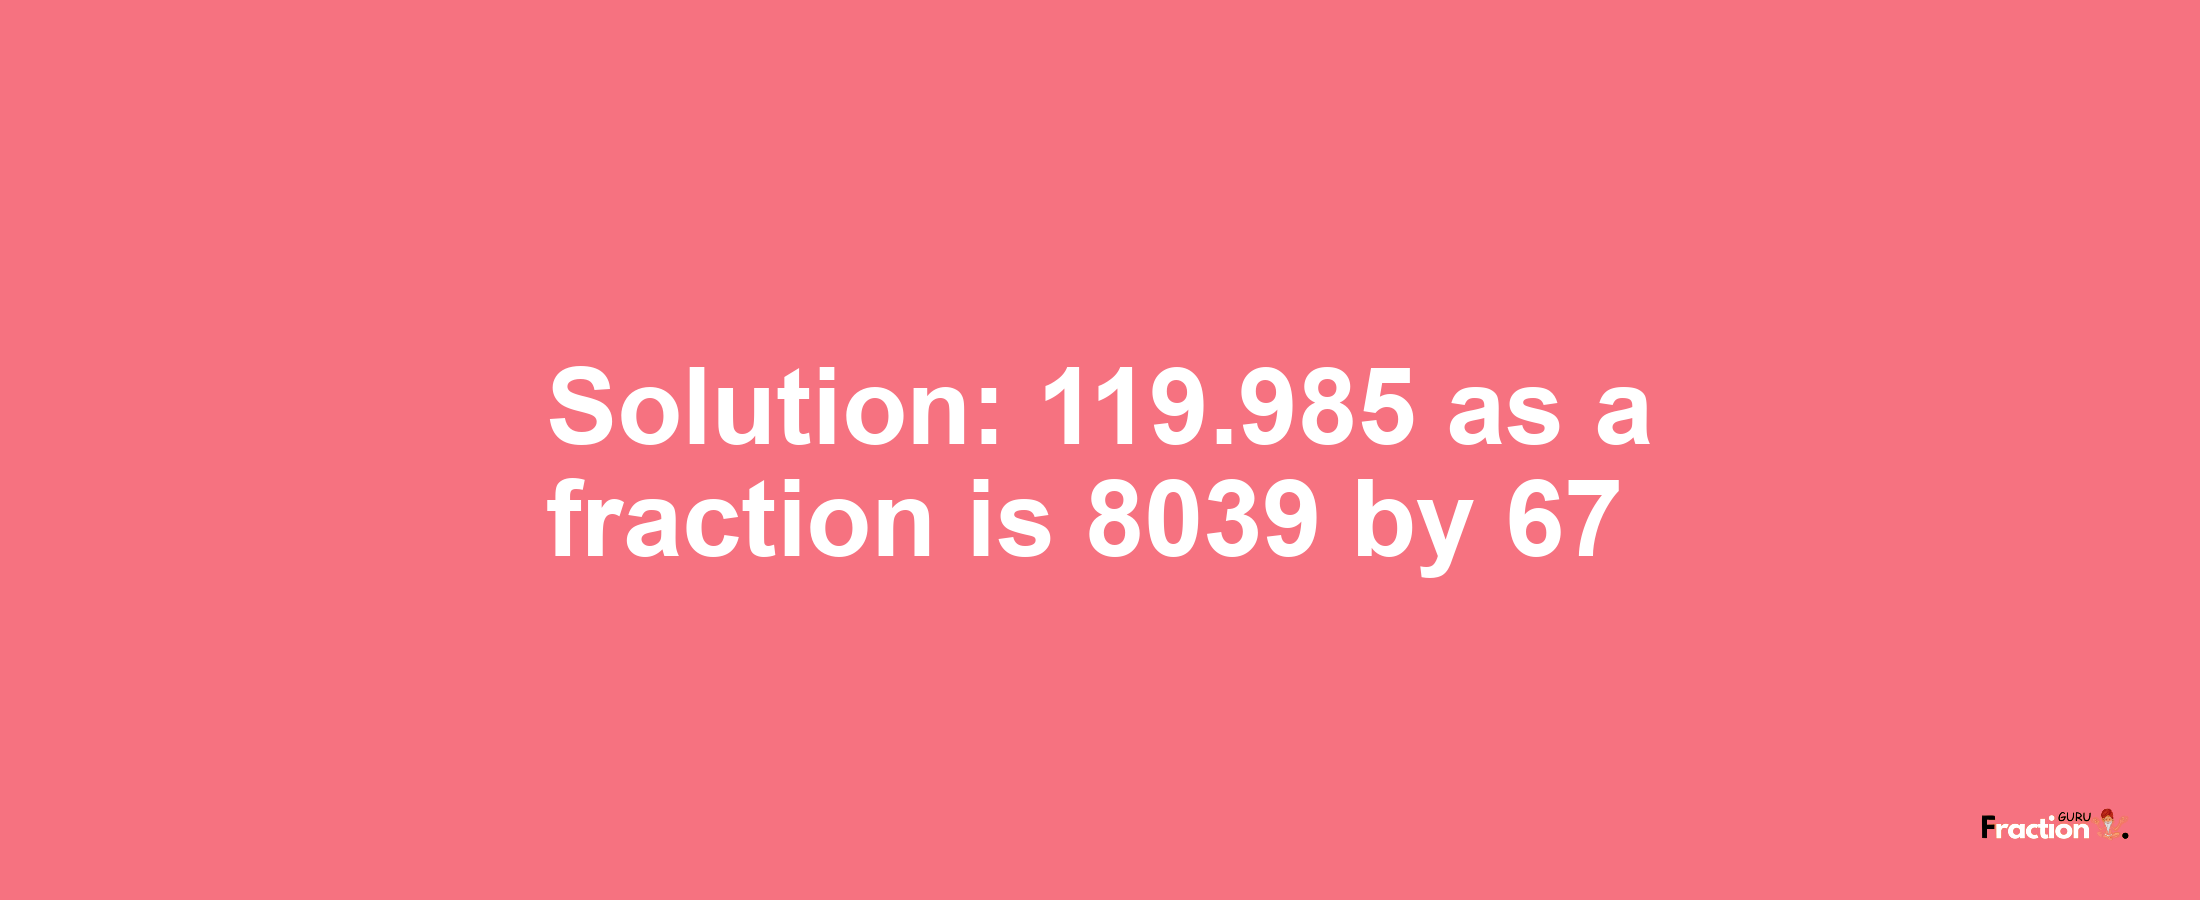 Solution:119.985 as a fraction is 8039/67